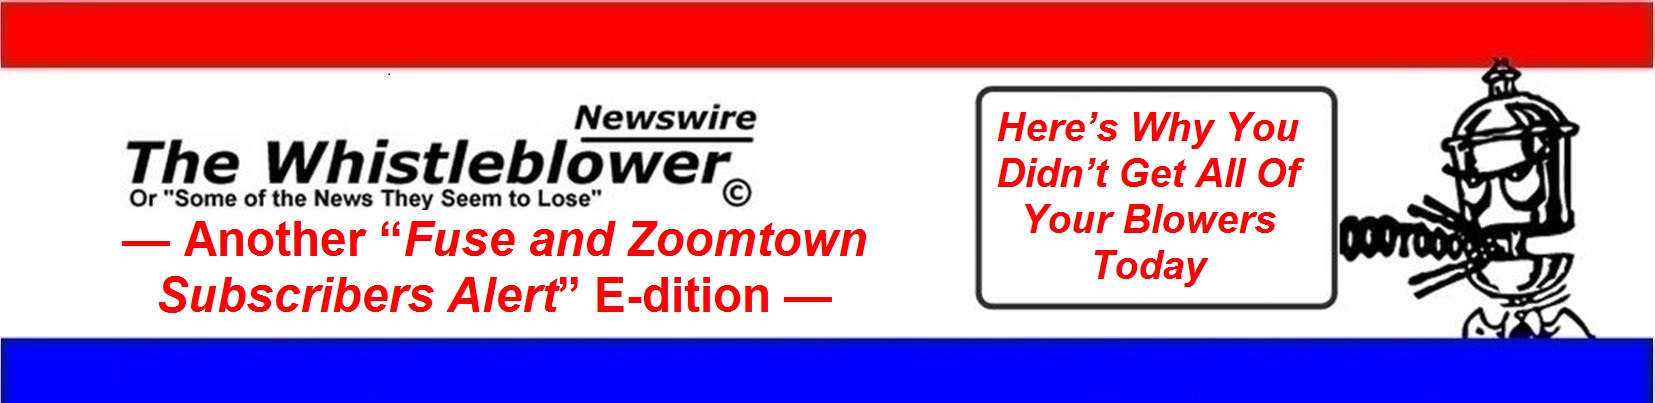 MAR 8 ANOTHER FUSE AND ZOOMTOWN SUBSCRIBERS ALERT